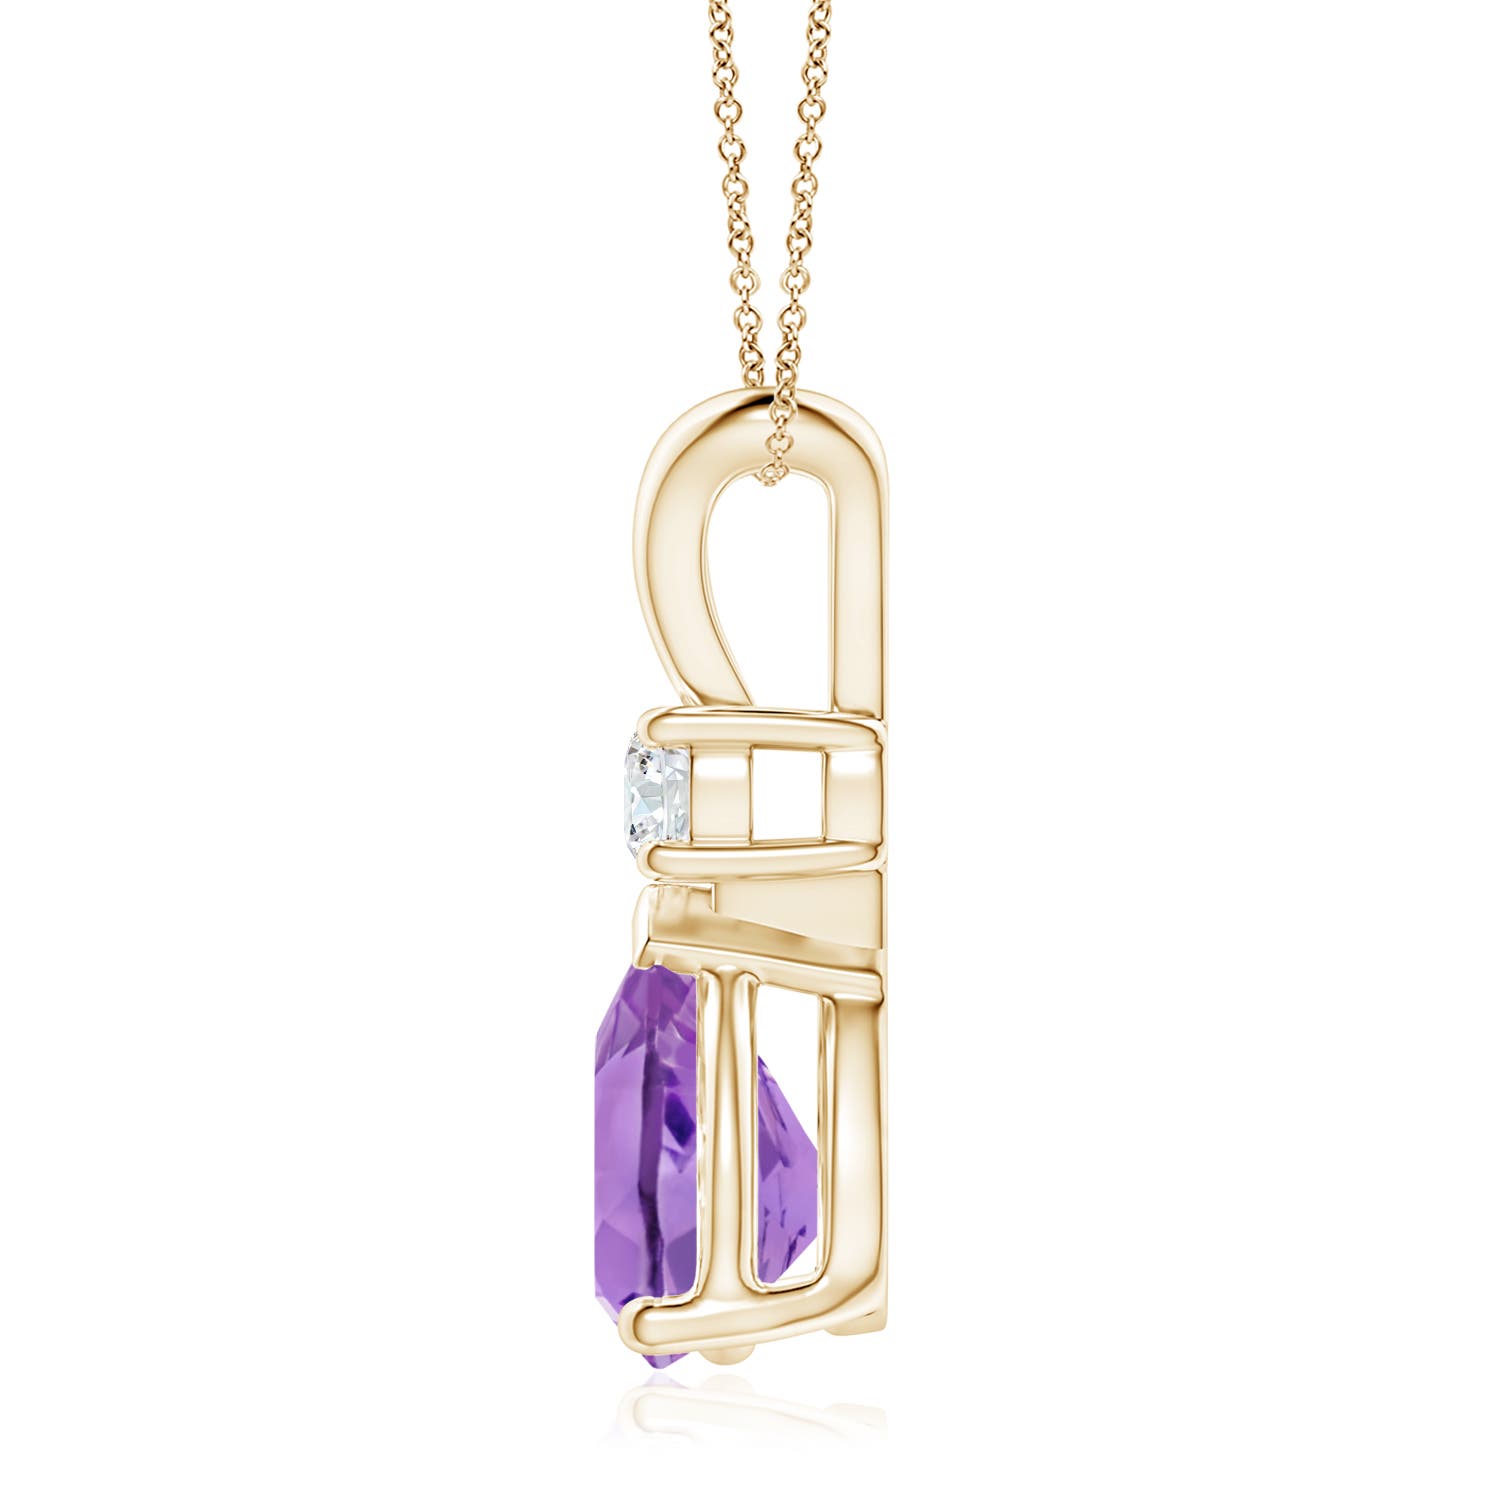 A - Amethyst / 2.78 CT / 14 KT Yellow Gold